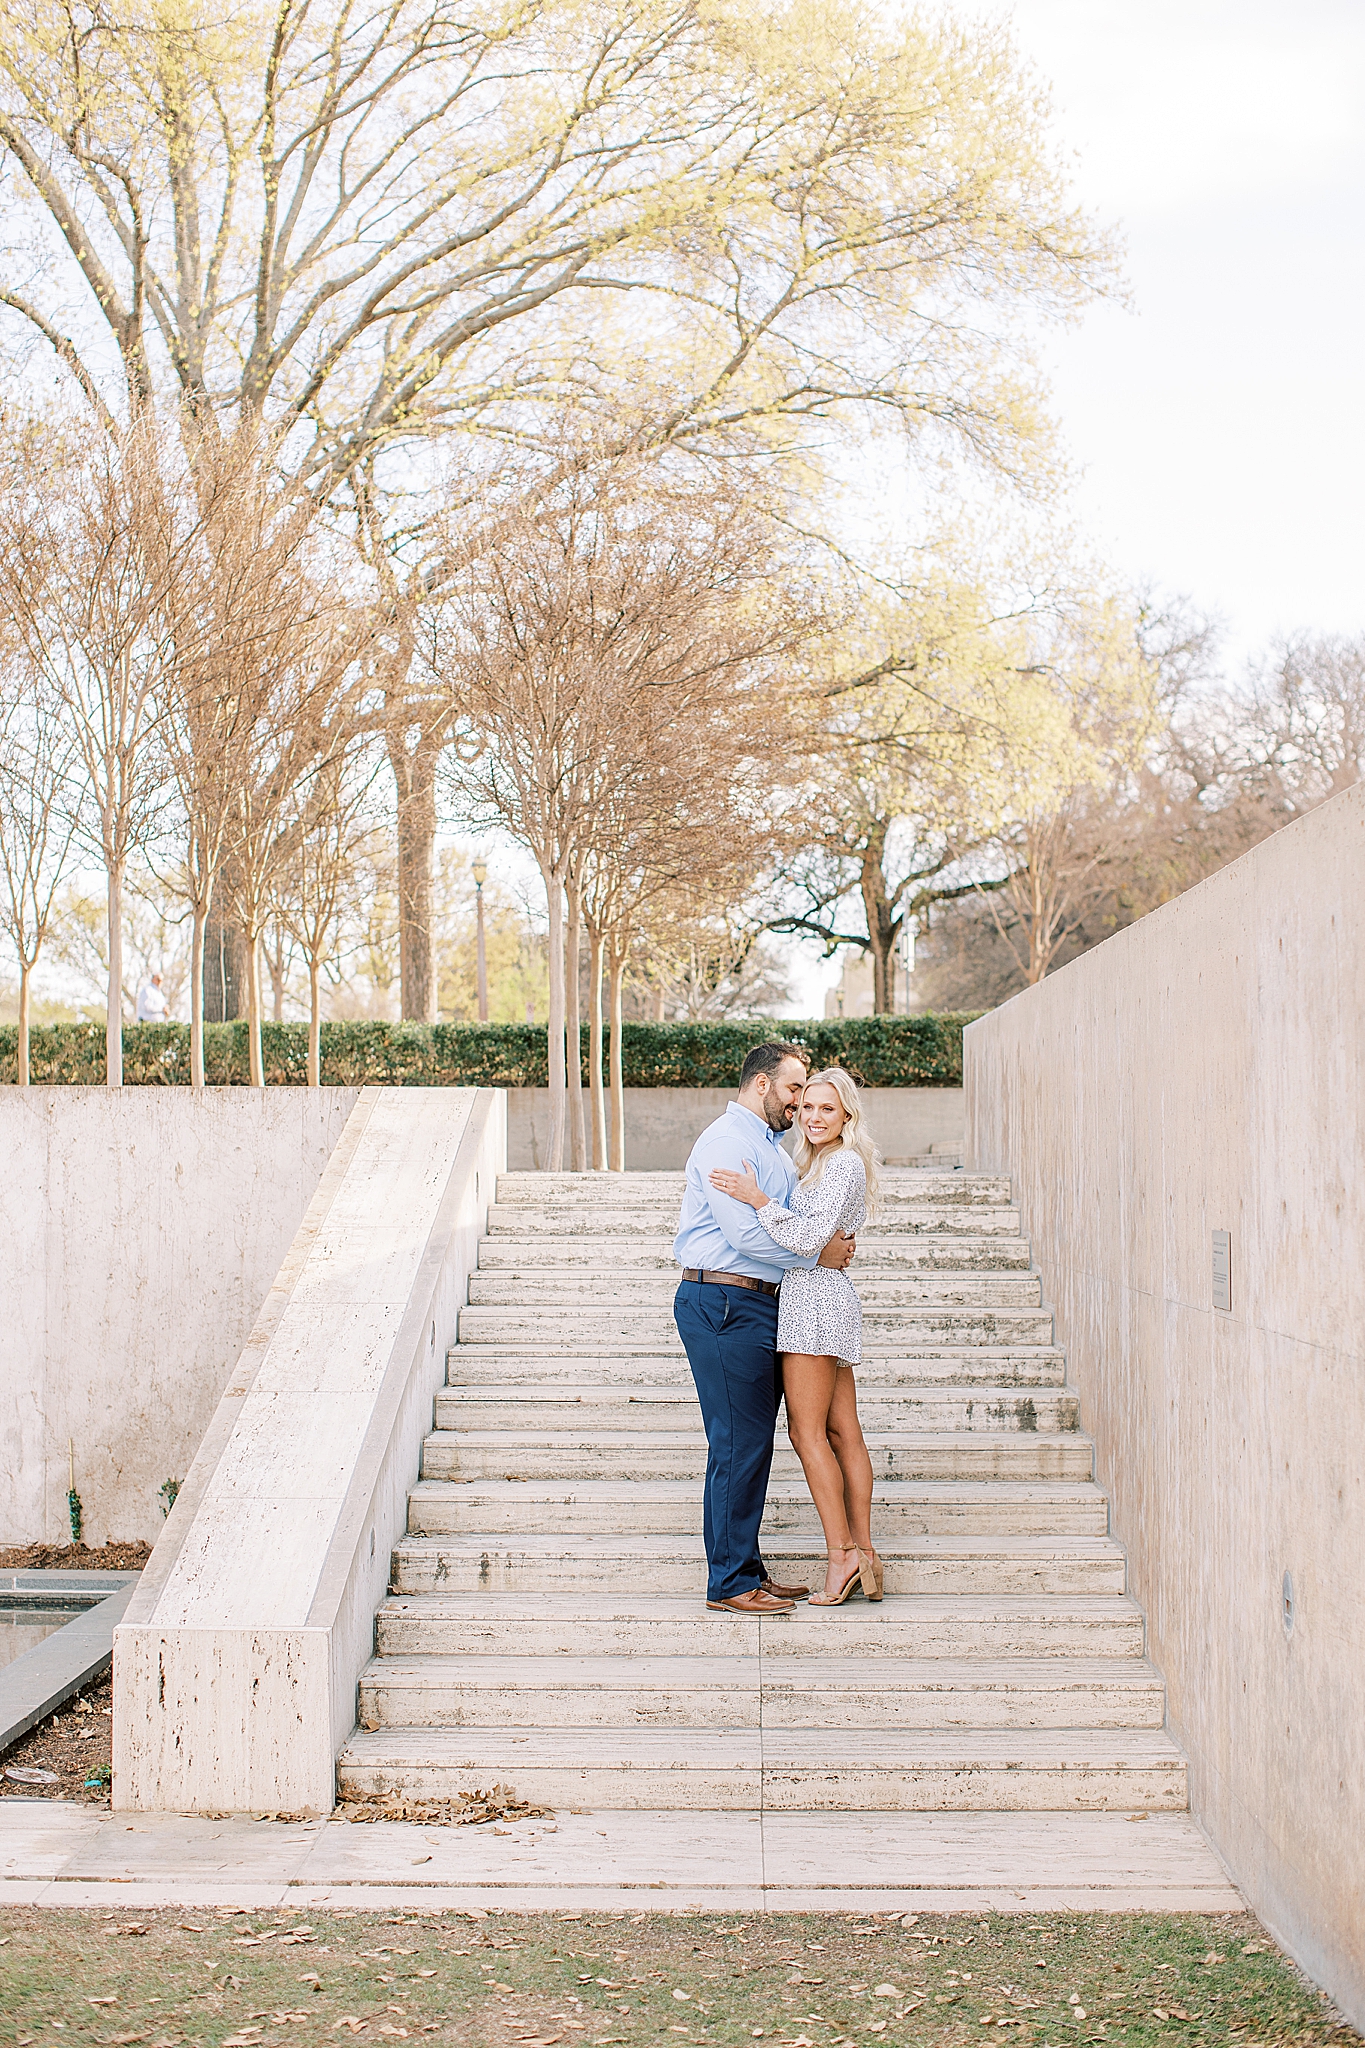 Texas couple poses together on steps at Kimball Art Museum